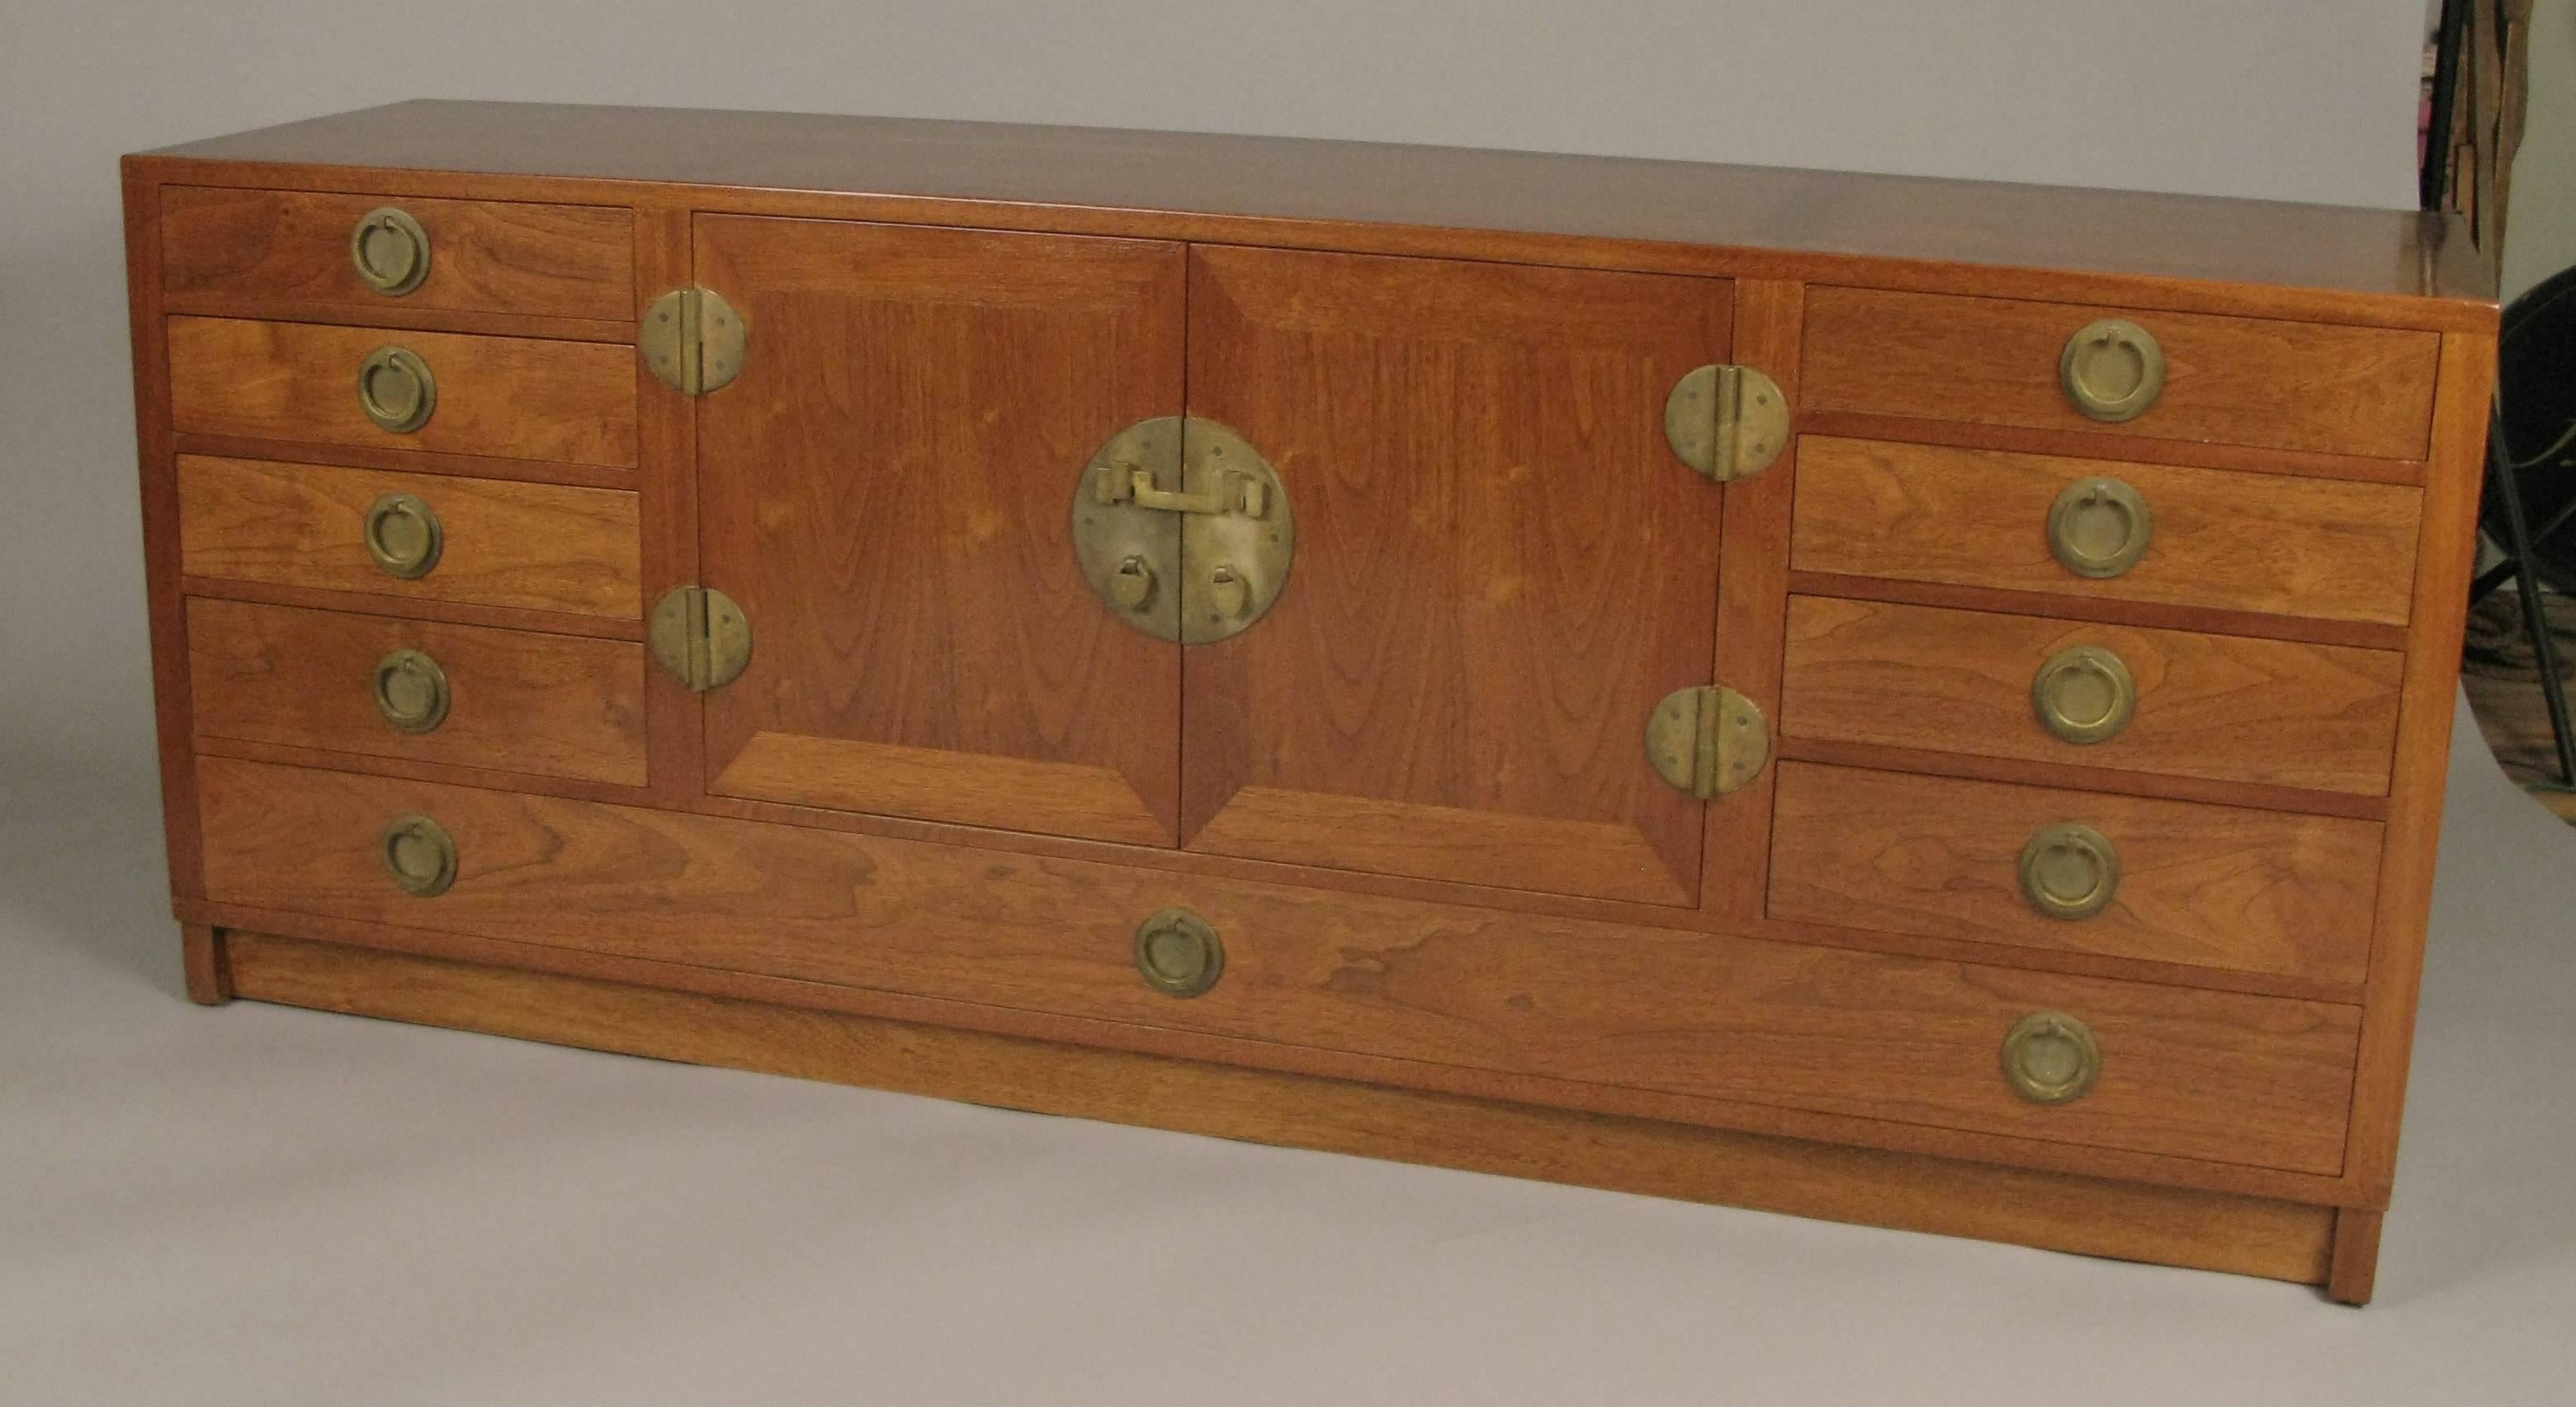 A beautiful and Classic 1950s walnut and mahogany sideboard designed by Edward Wormley for Dunbar, with solid brass hardware in an Asian Modern style. The centre section has a pair of doors concealing a glass shelf, and a removable glass serving